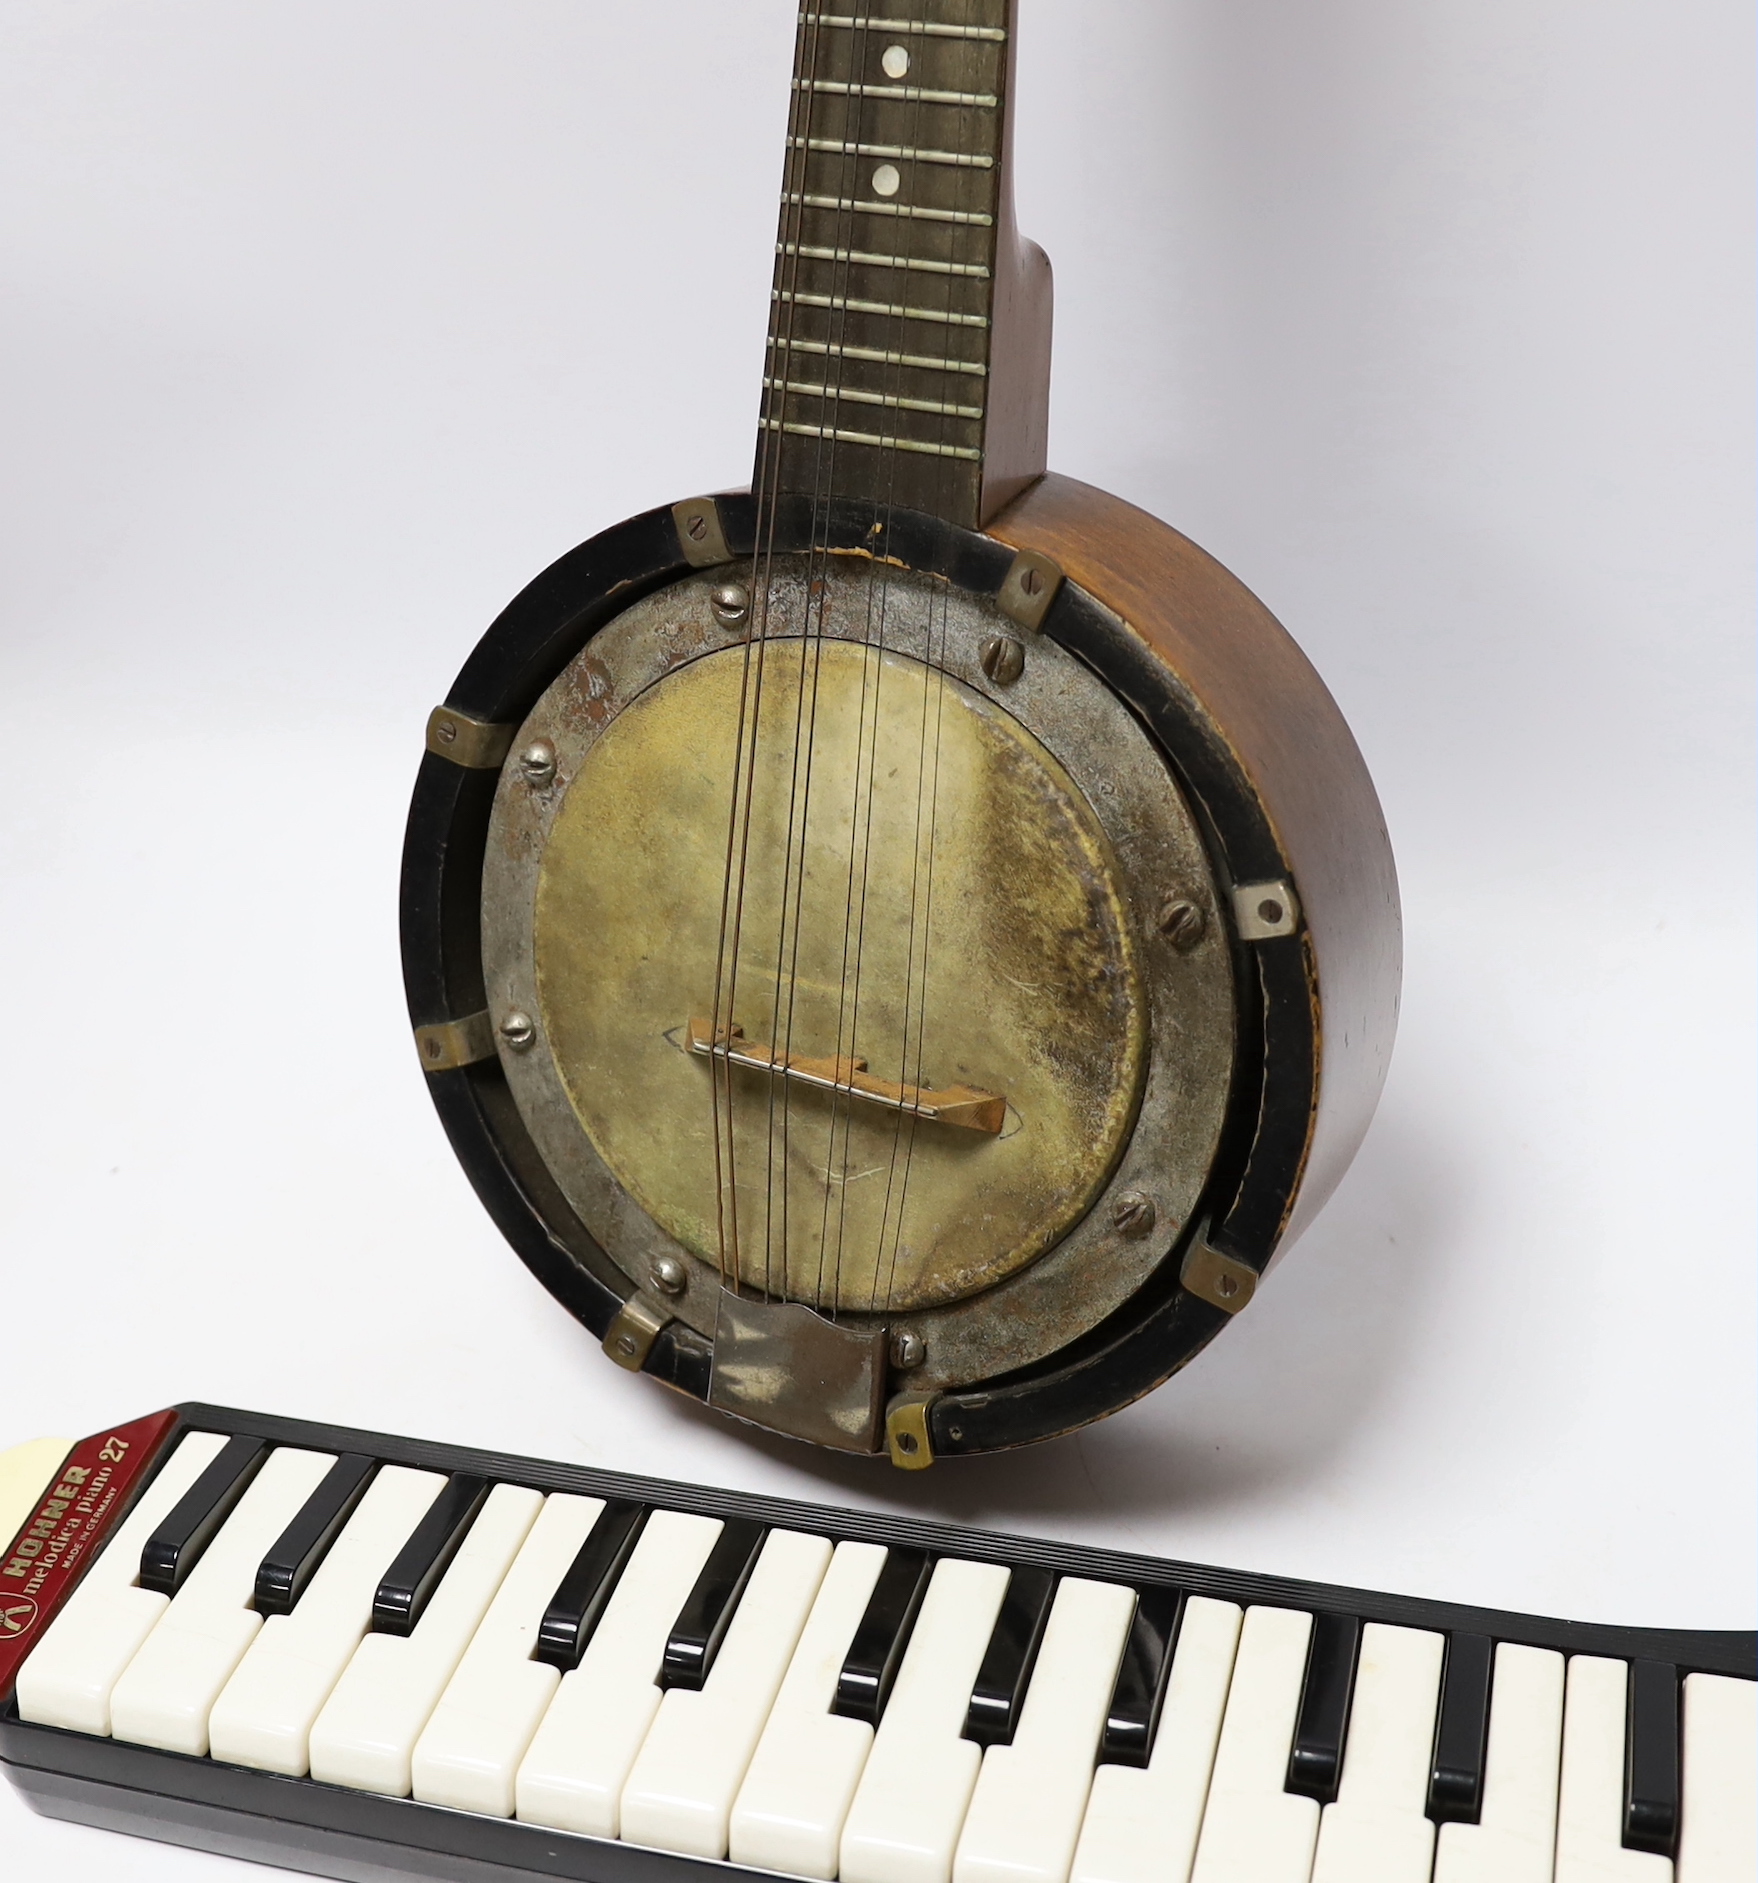 A John Grey and sons, London eight string banjolele in original case and a Hohner melodica